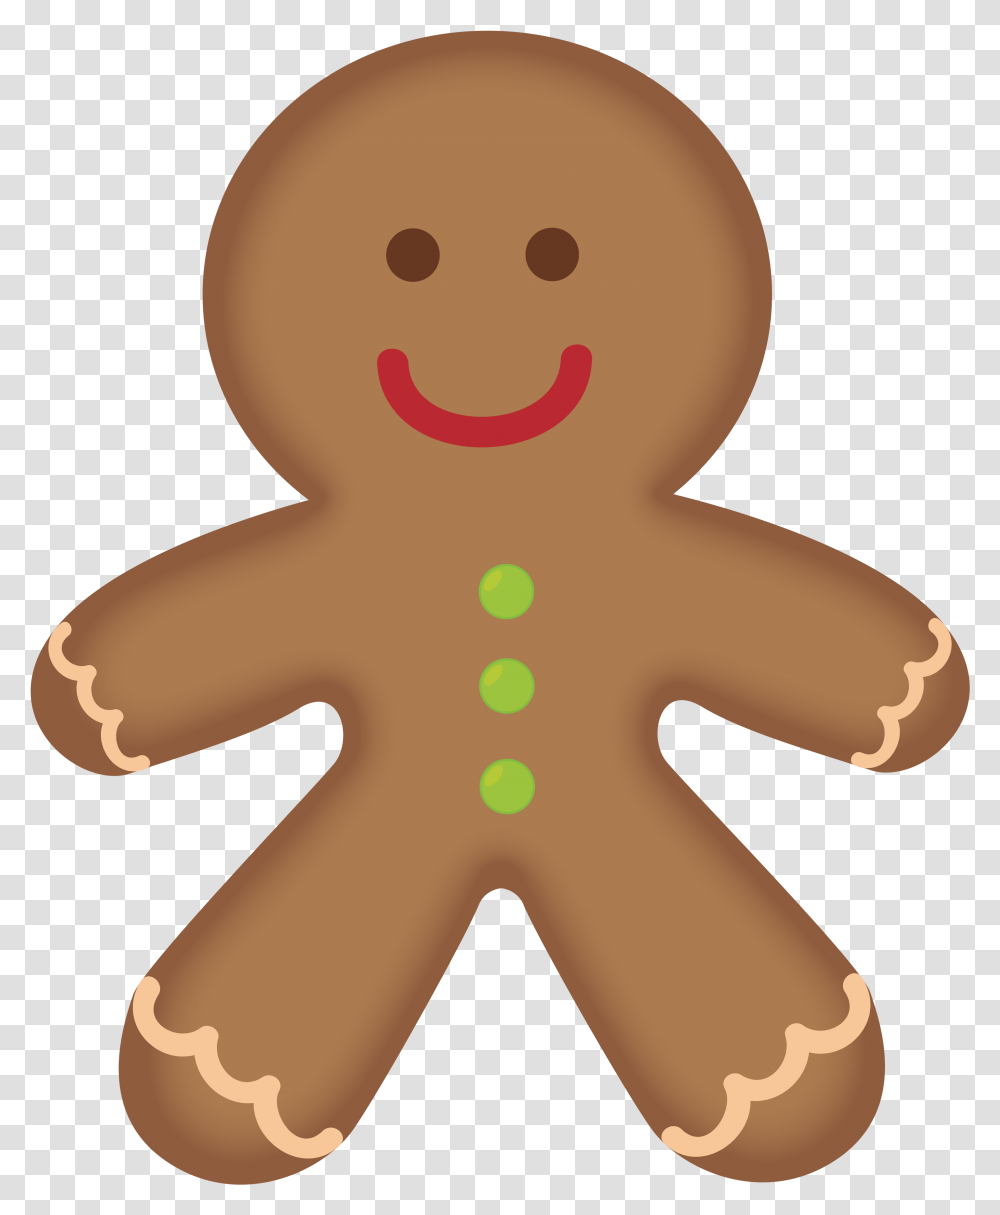 The Gingerbread Man Gingerbread House Clip Art Background Gingerbread Man Clipart, Cookie, Food, Biscuit, Snowman Transparent Png